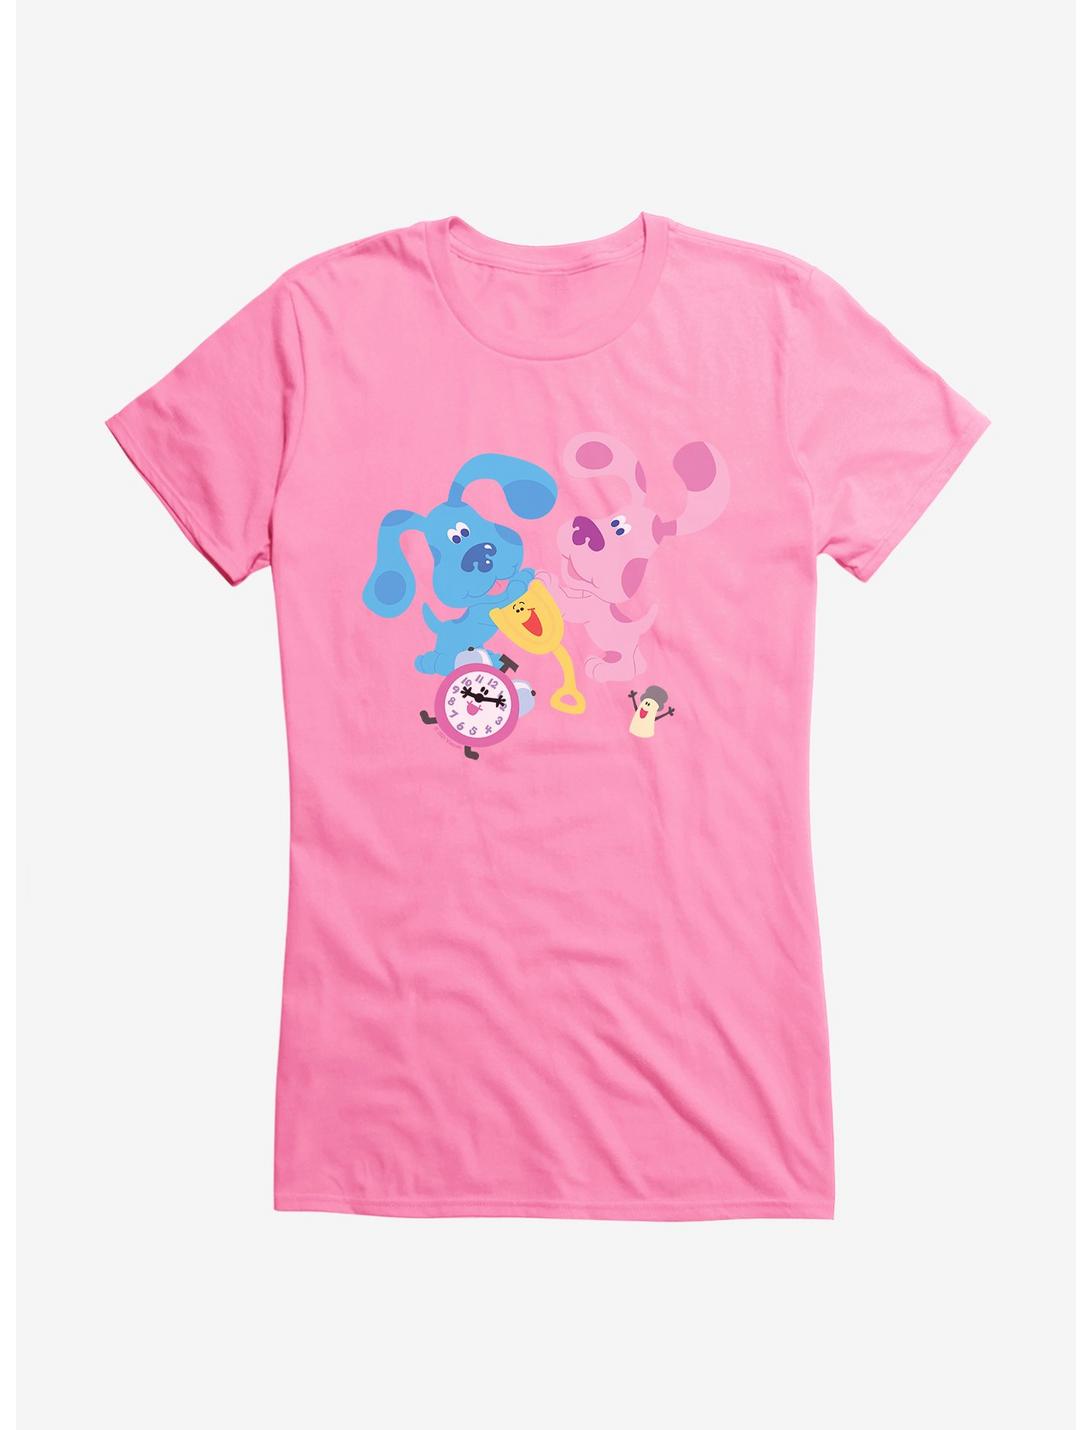 Blue's Clues Group Playtime Girls T-Shirt, , hi-res